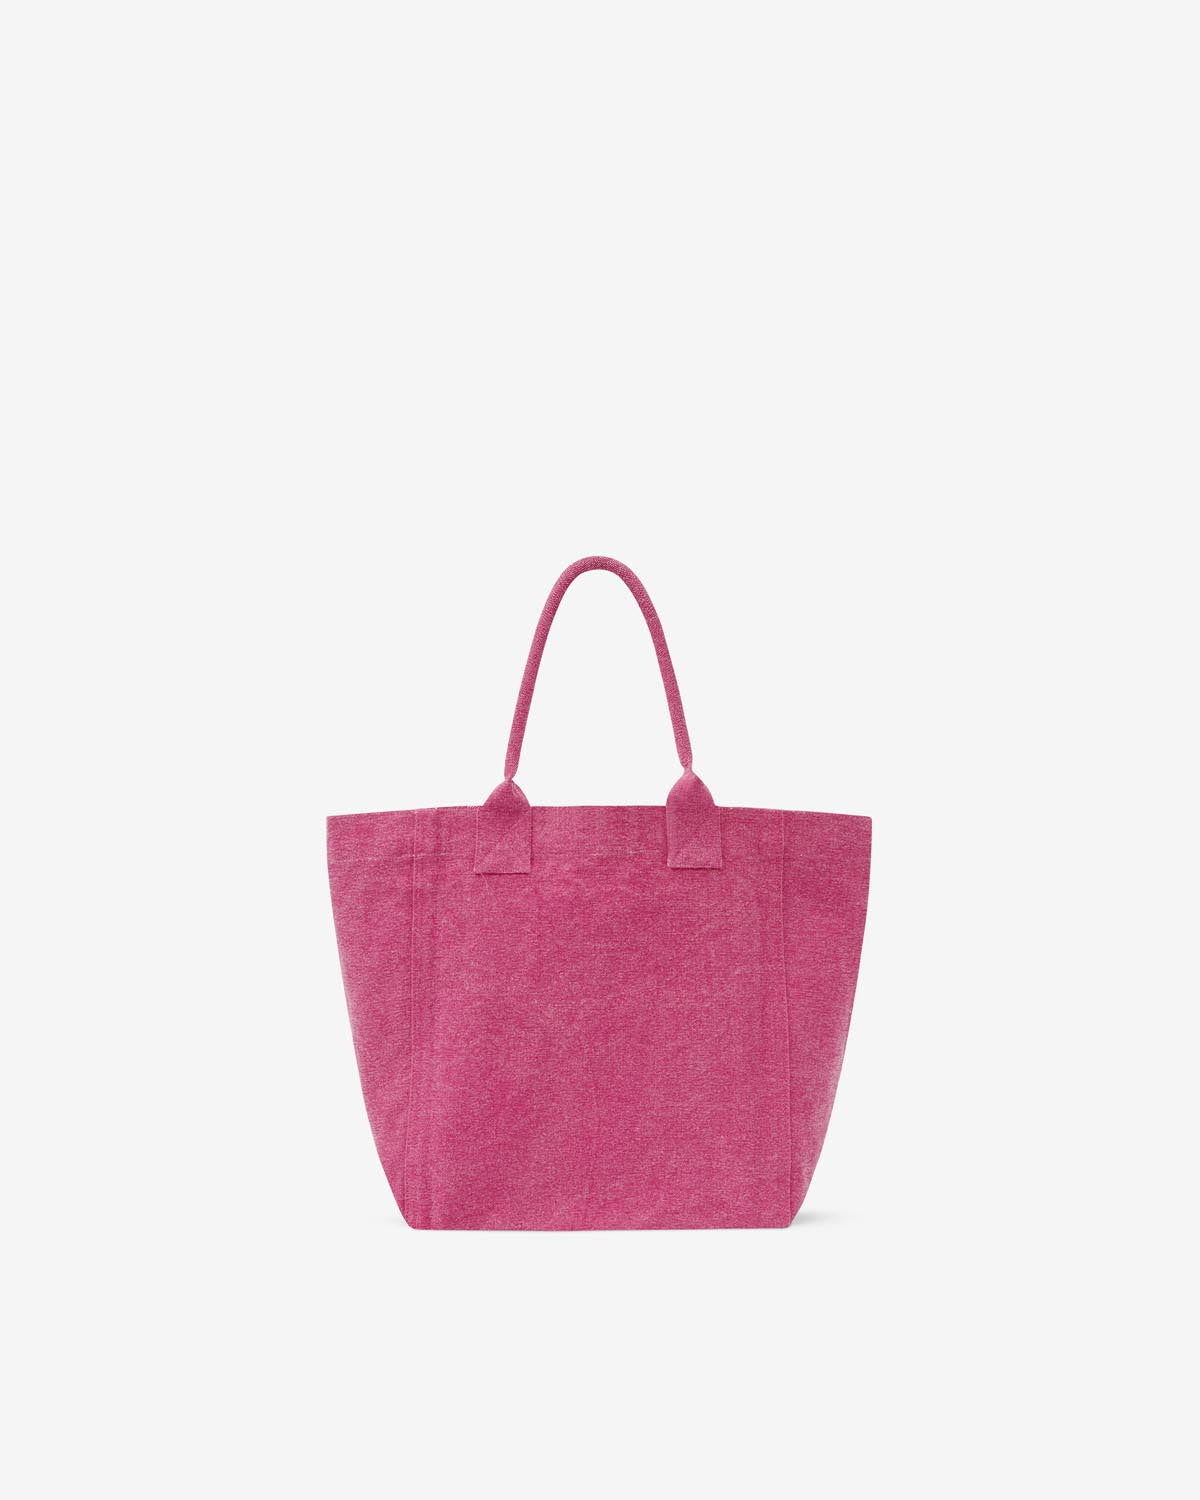 Tote bag yenky small Woman Rosa 10